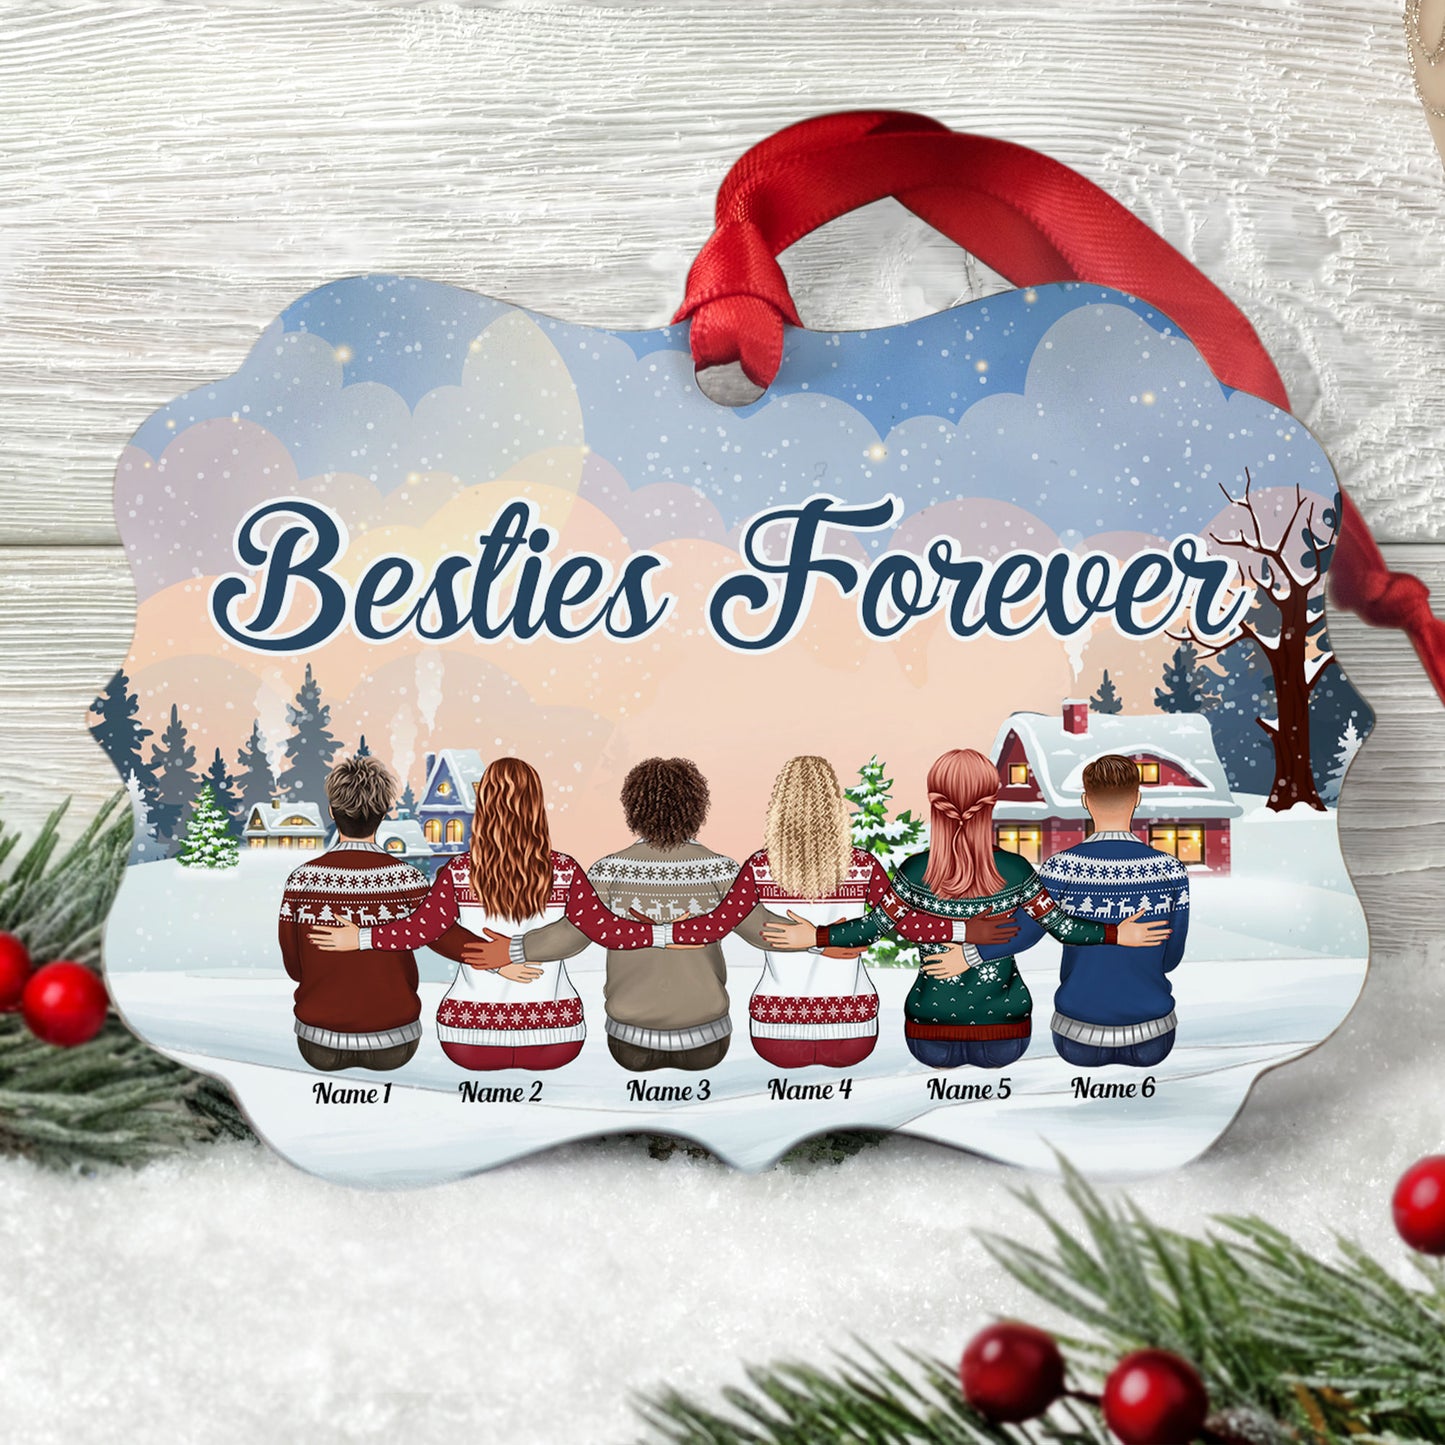 Besties Forever - Personalized Aluminum Ornament - Christmas Gift Friends Ornament For Besties - Family Hugging